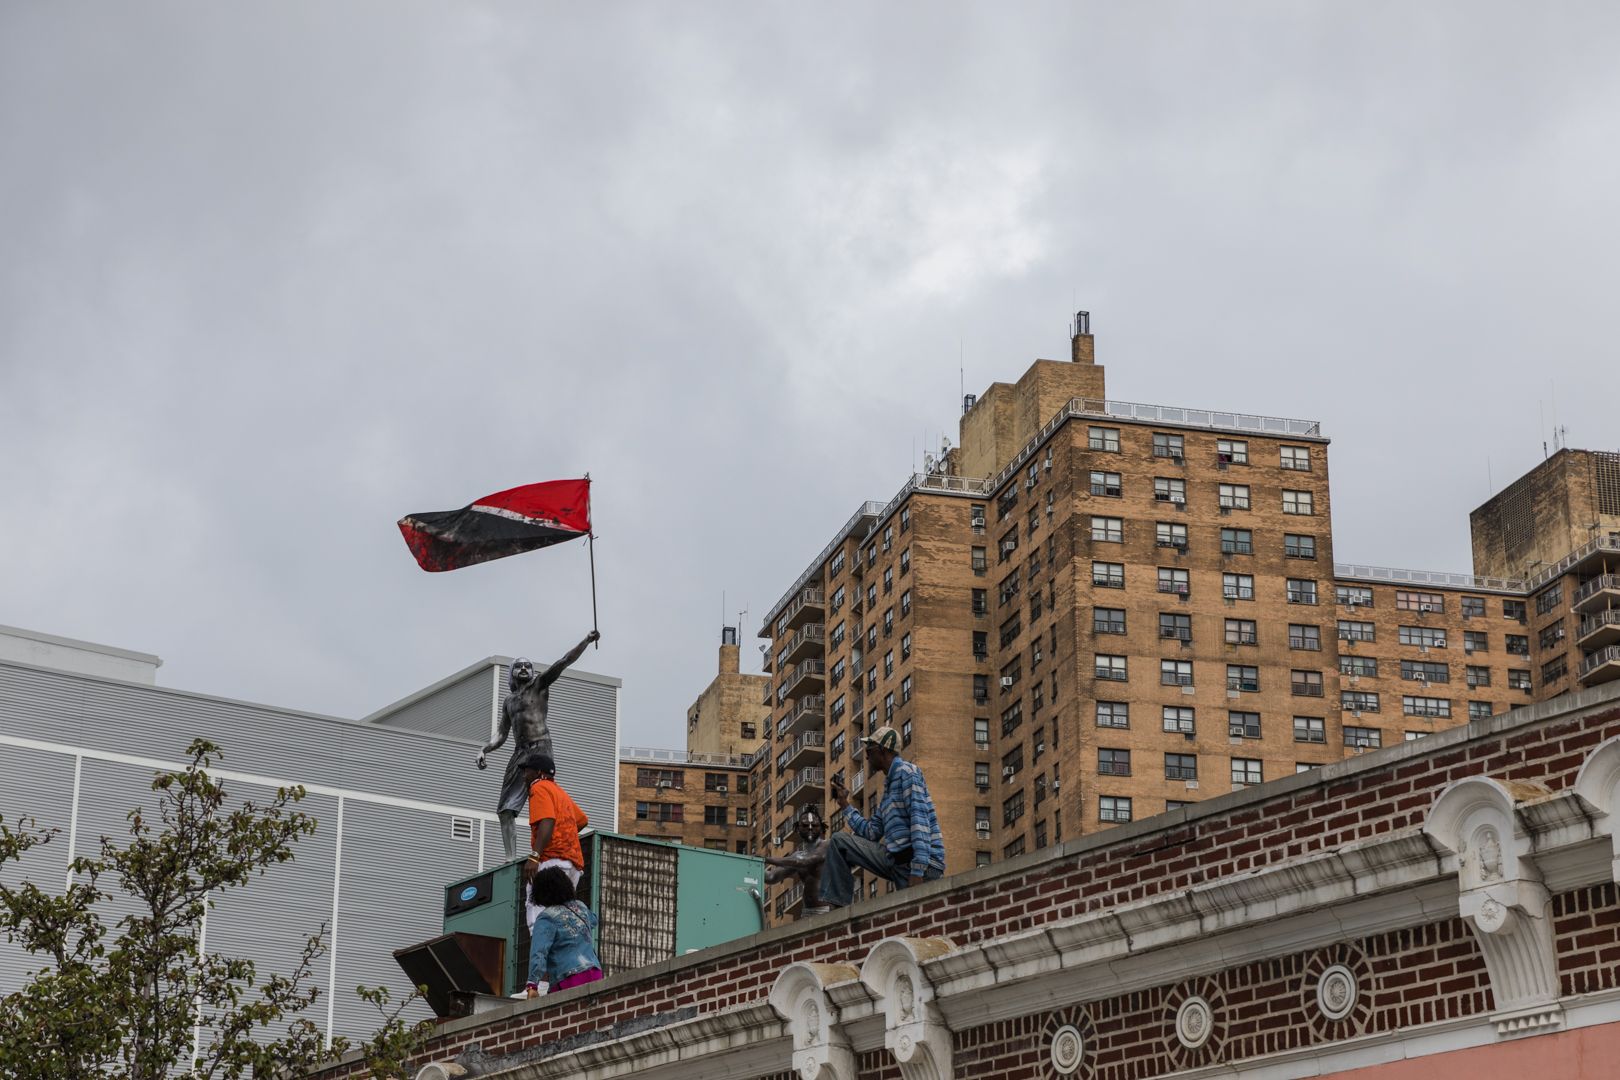 The flag for Trinidad and Tobago is flown high.